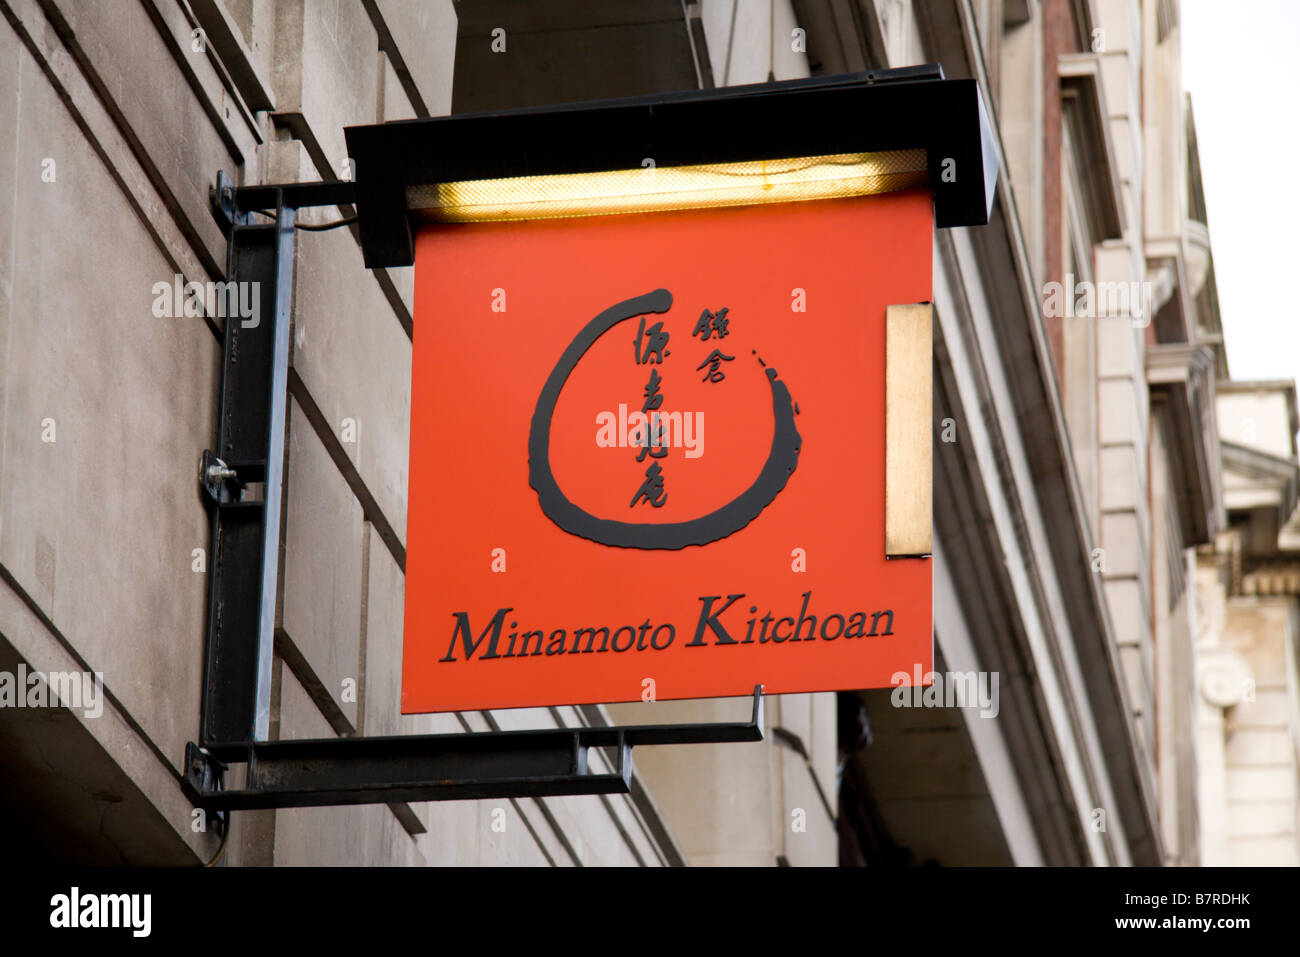 Sign above the entrance to the Minamoto Kitchoan shop (Japanese confectionery and health foods) on Piccadilly, London. Jan 2009 Stock Photo